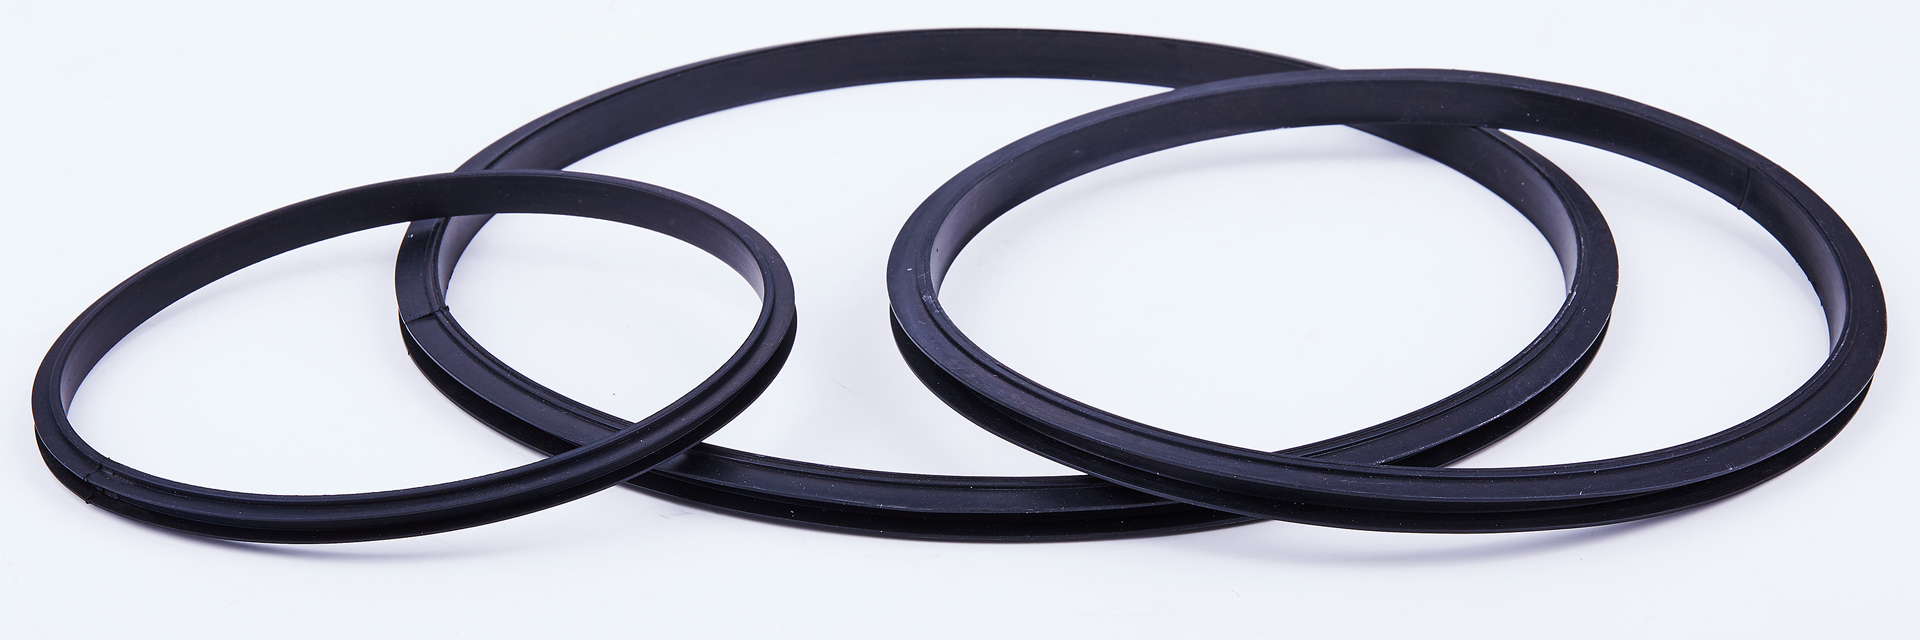 Splicing Jointed Ring Gasket